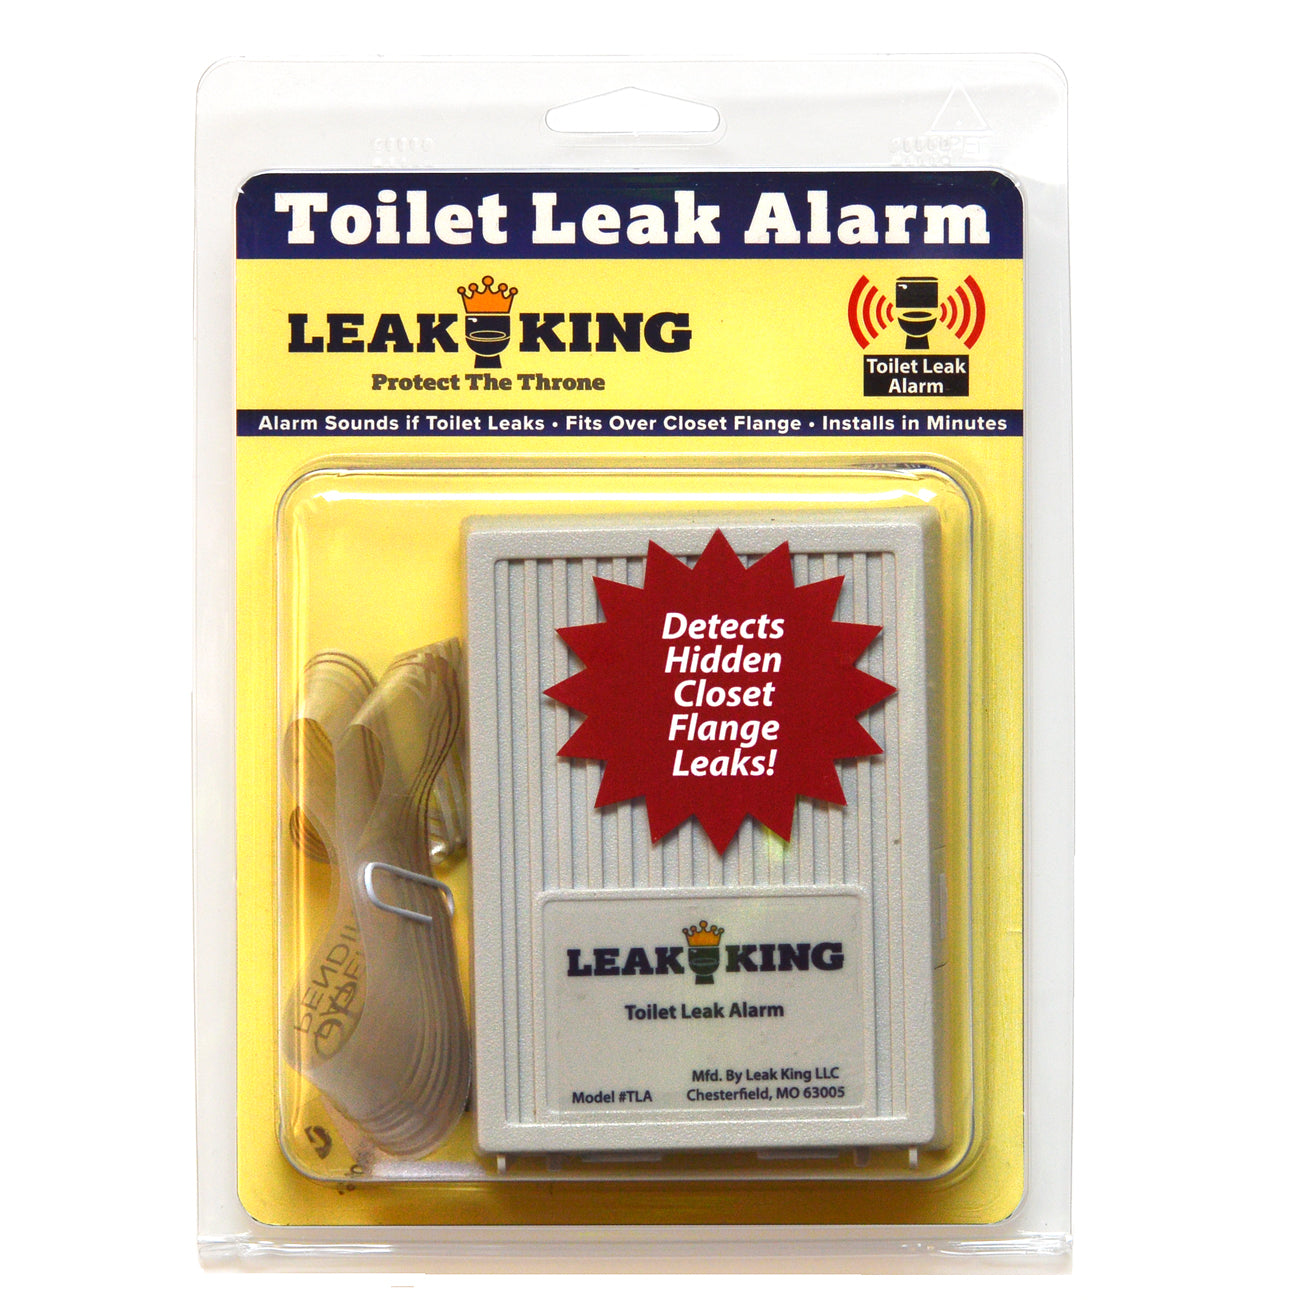 The Toilet Leak Alarm is water leak alarm system for the often, and very costly toilet ring (closet flange) type water leaks as well as and other types of leaks that are hidden out of site and under or around the toilet.